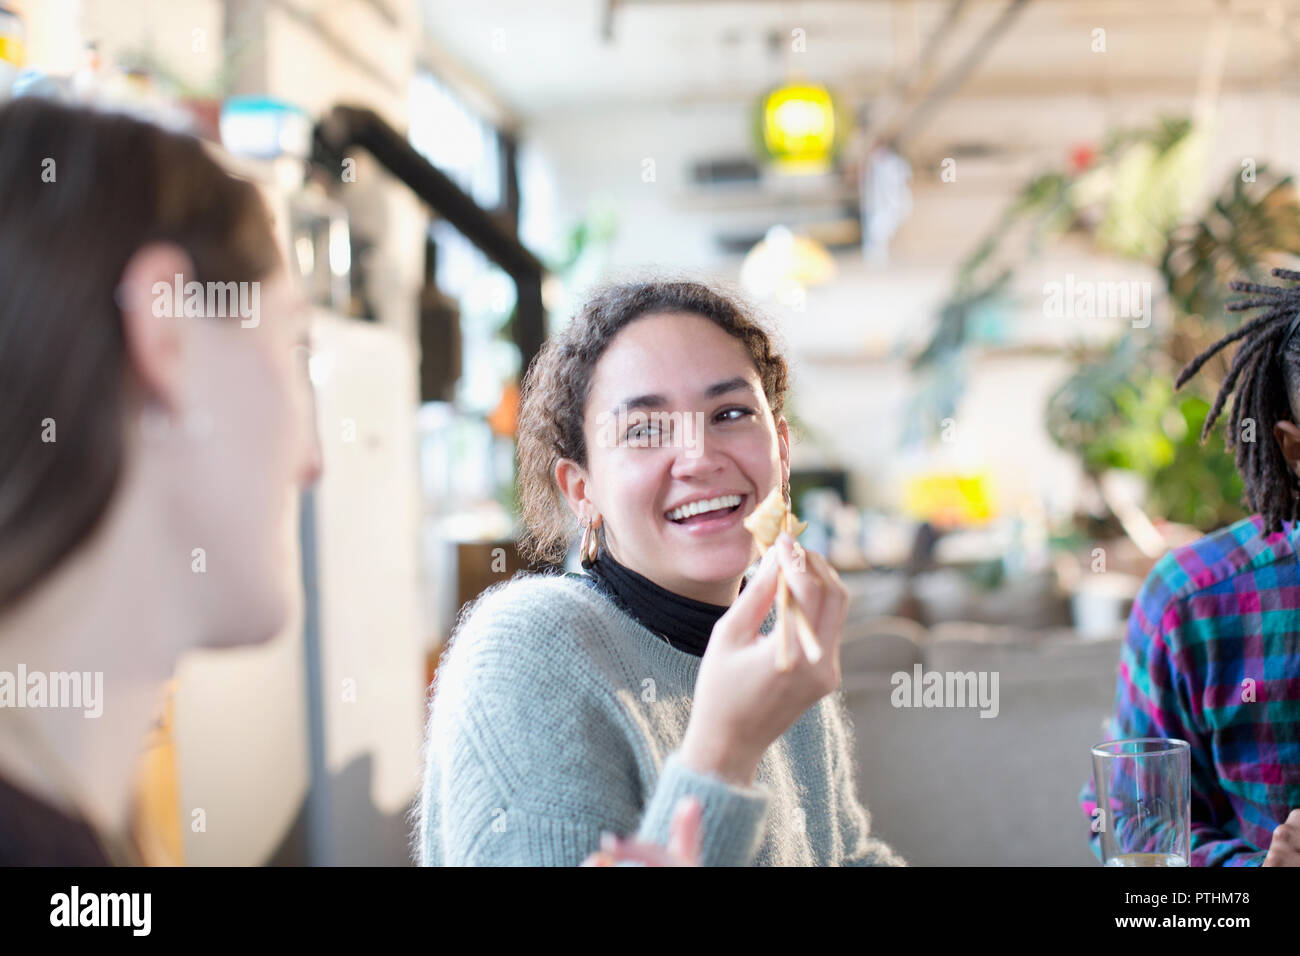 Laughing young woman enjoying Chinese takeout food with friends Stock Photo